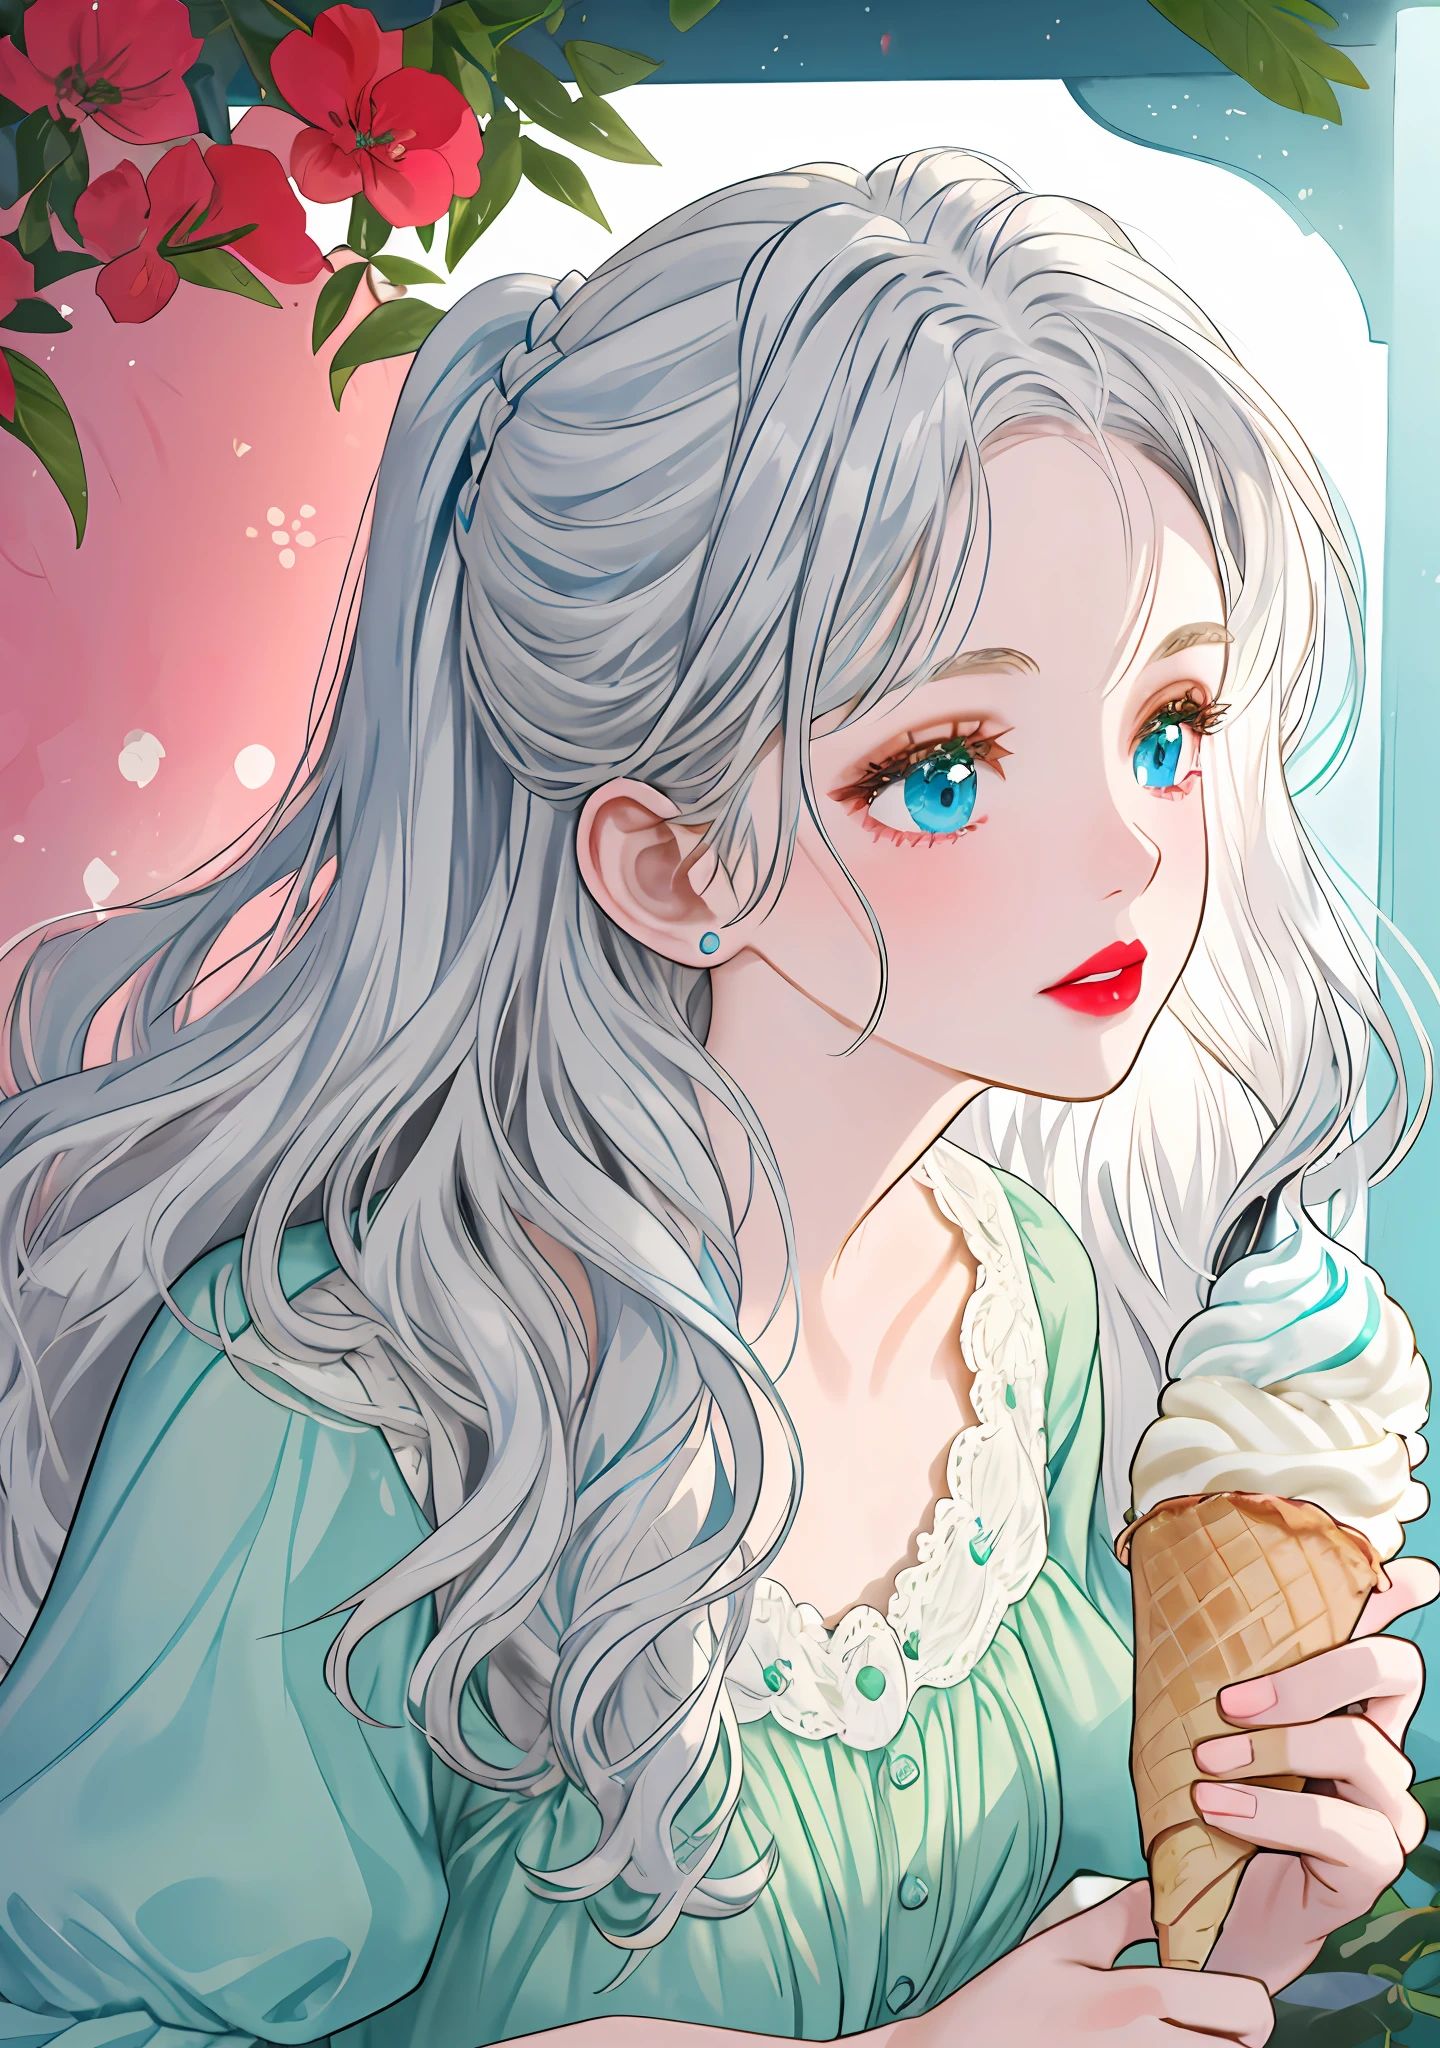 a close-up of a person holding an ice cream cone, sweet girl, woman with wavy silver hair, bangs, light blue eyes, red lips, tender green dress,